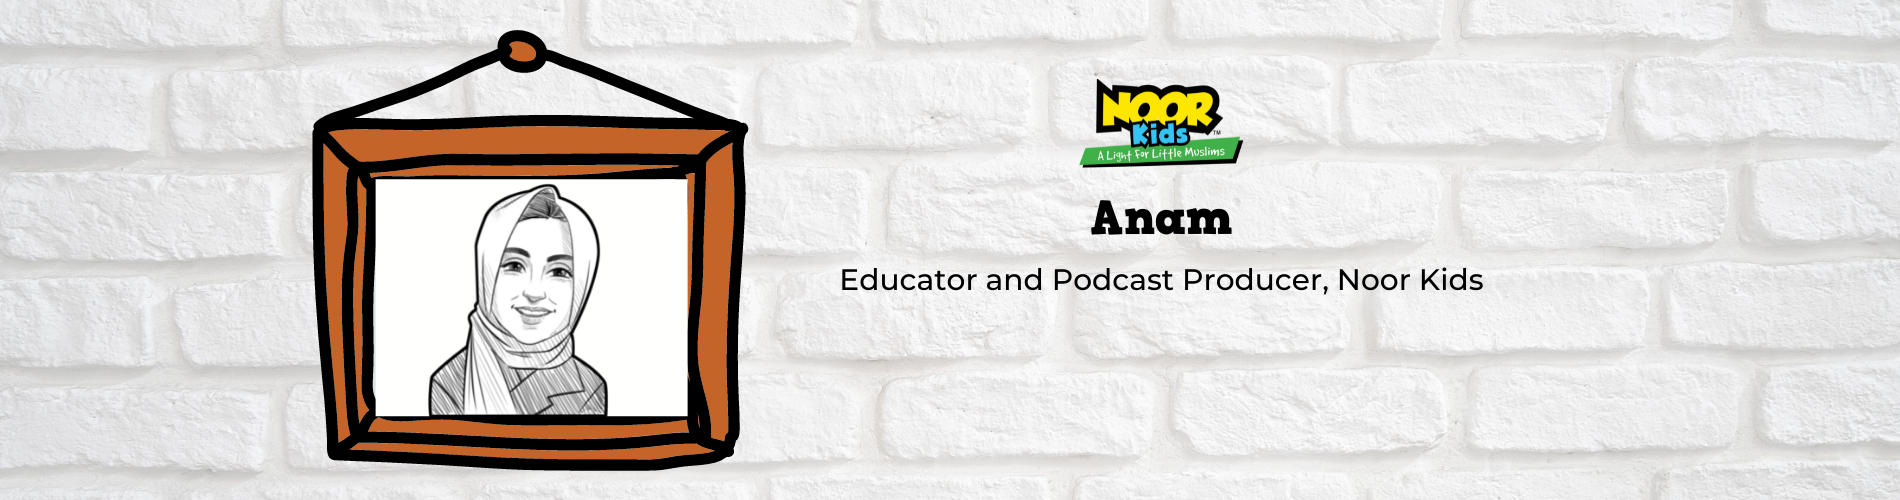 Meet Anam, Educator & Podcast Producer at Noor Kids